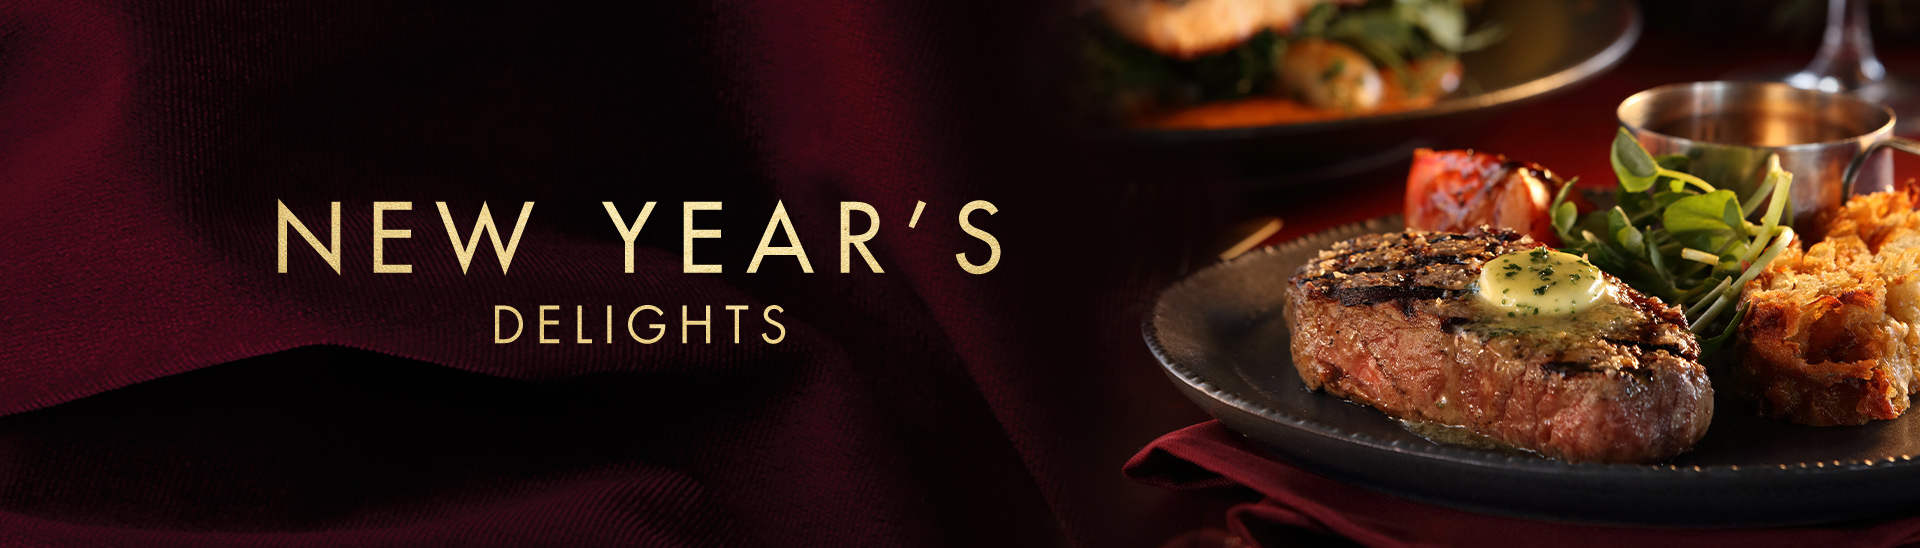 New Year’s Eve 2019 at Miller & Carter Aylesbury